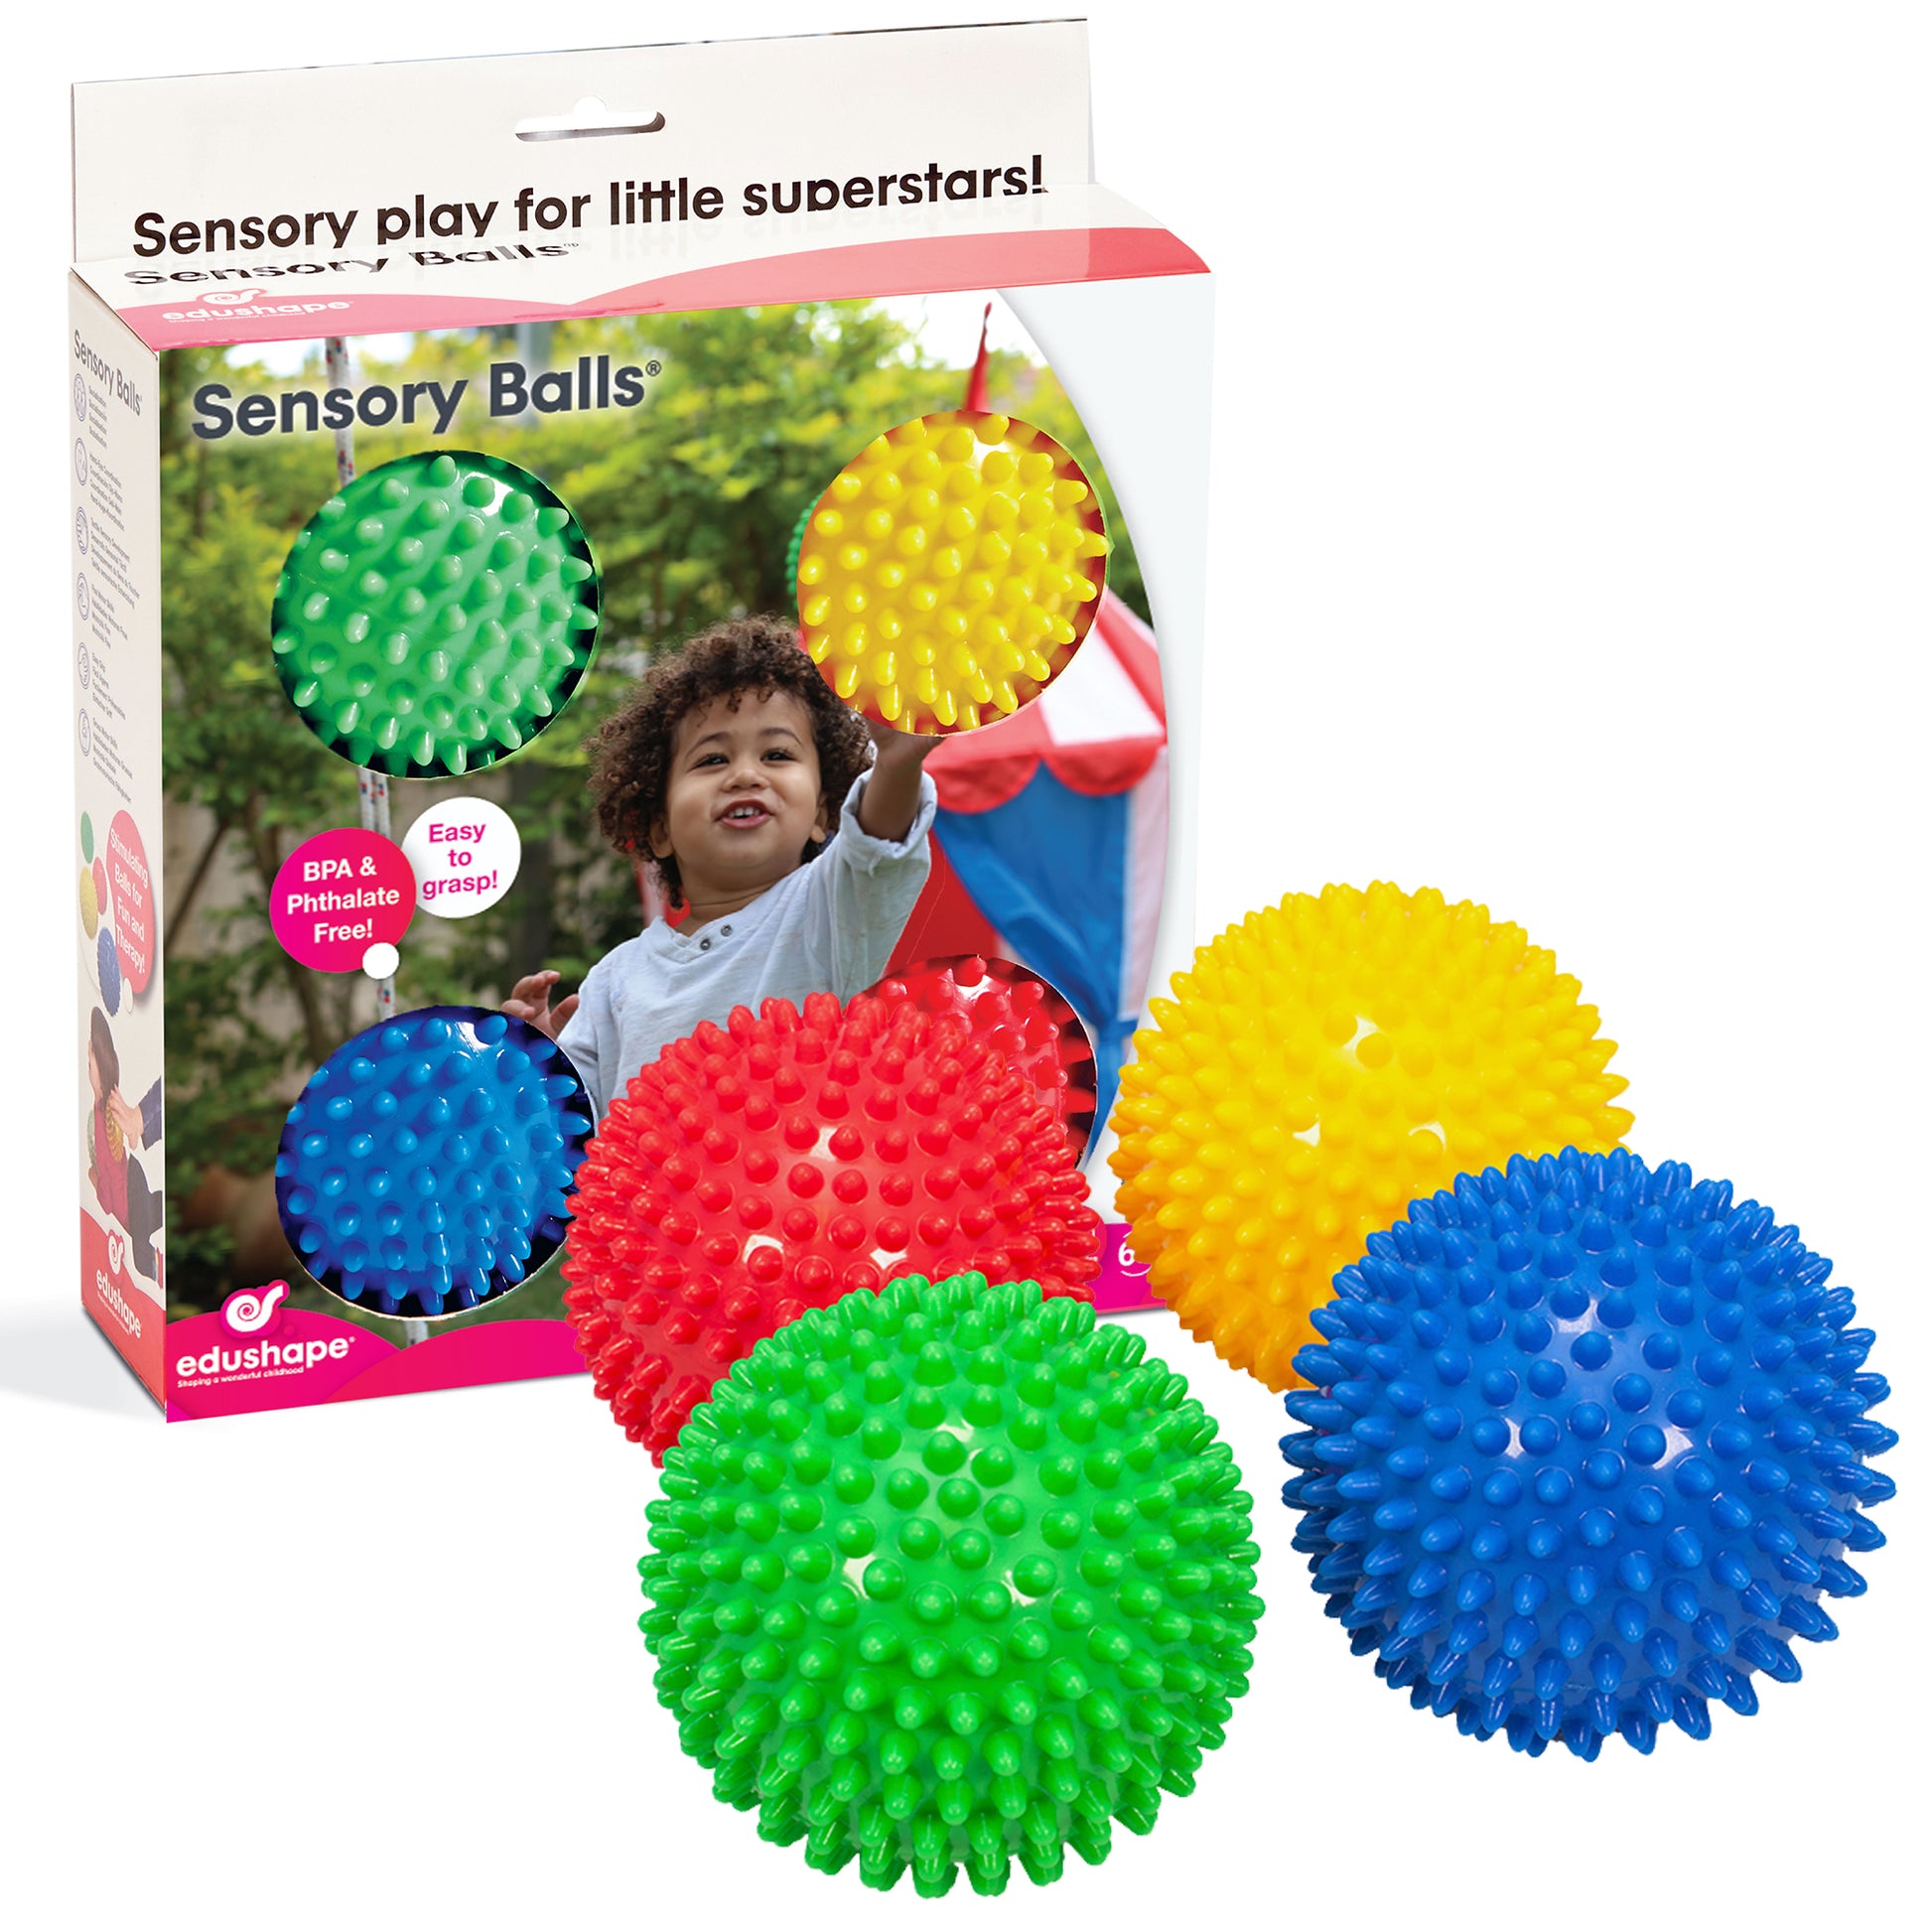 Edushape The Original Sensory Ball for Baby - 7 Baby Ball That Helps  Enhance Gross Motor Skills for Kids Aged 6 Months & Up - Vibrant, Colorful  and